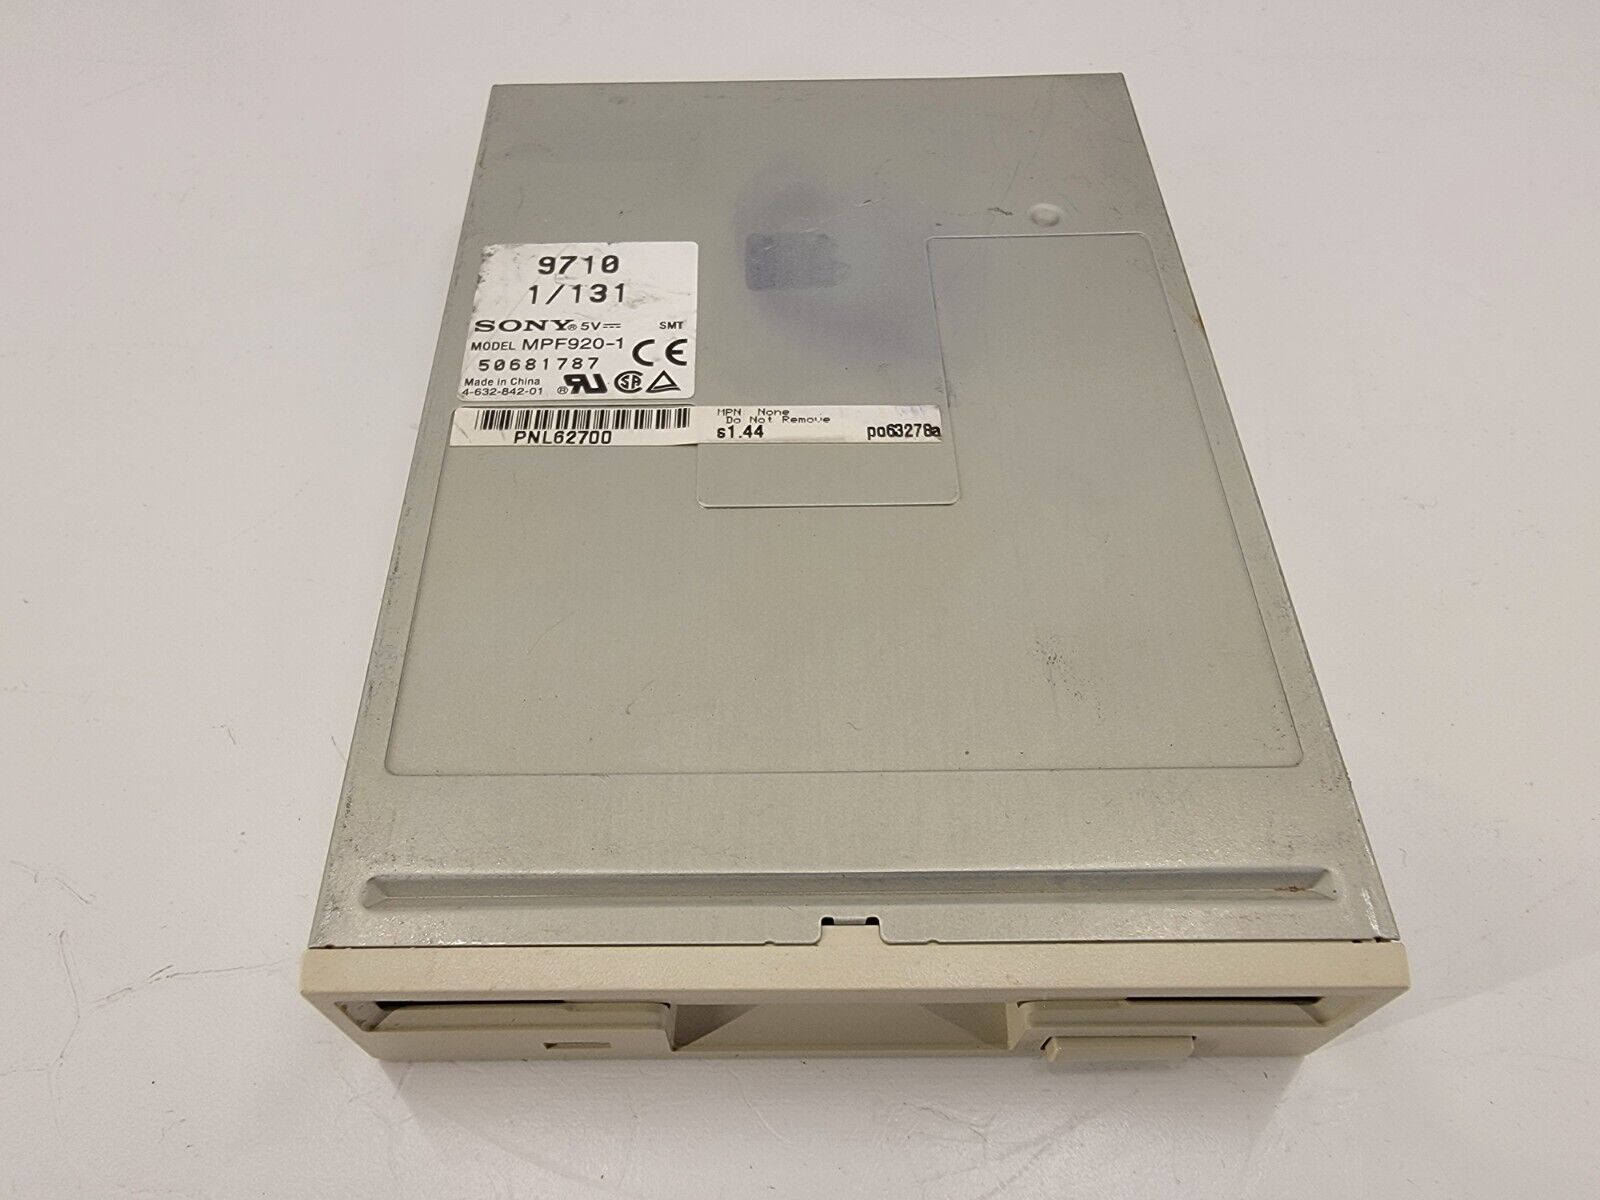 Sony MPF920-1 3.5” 1.44MB Vintage Floppy Disk Drive FDD Beige - Untested